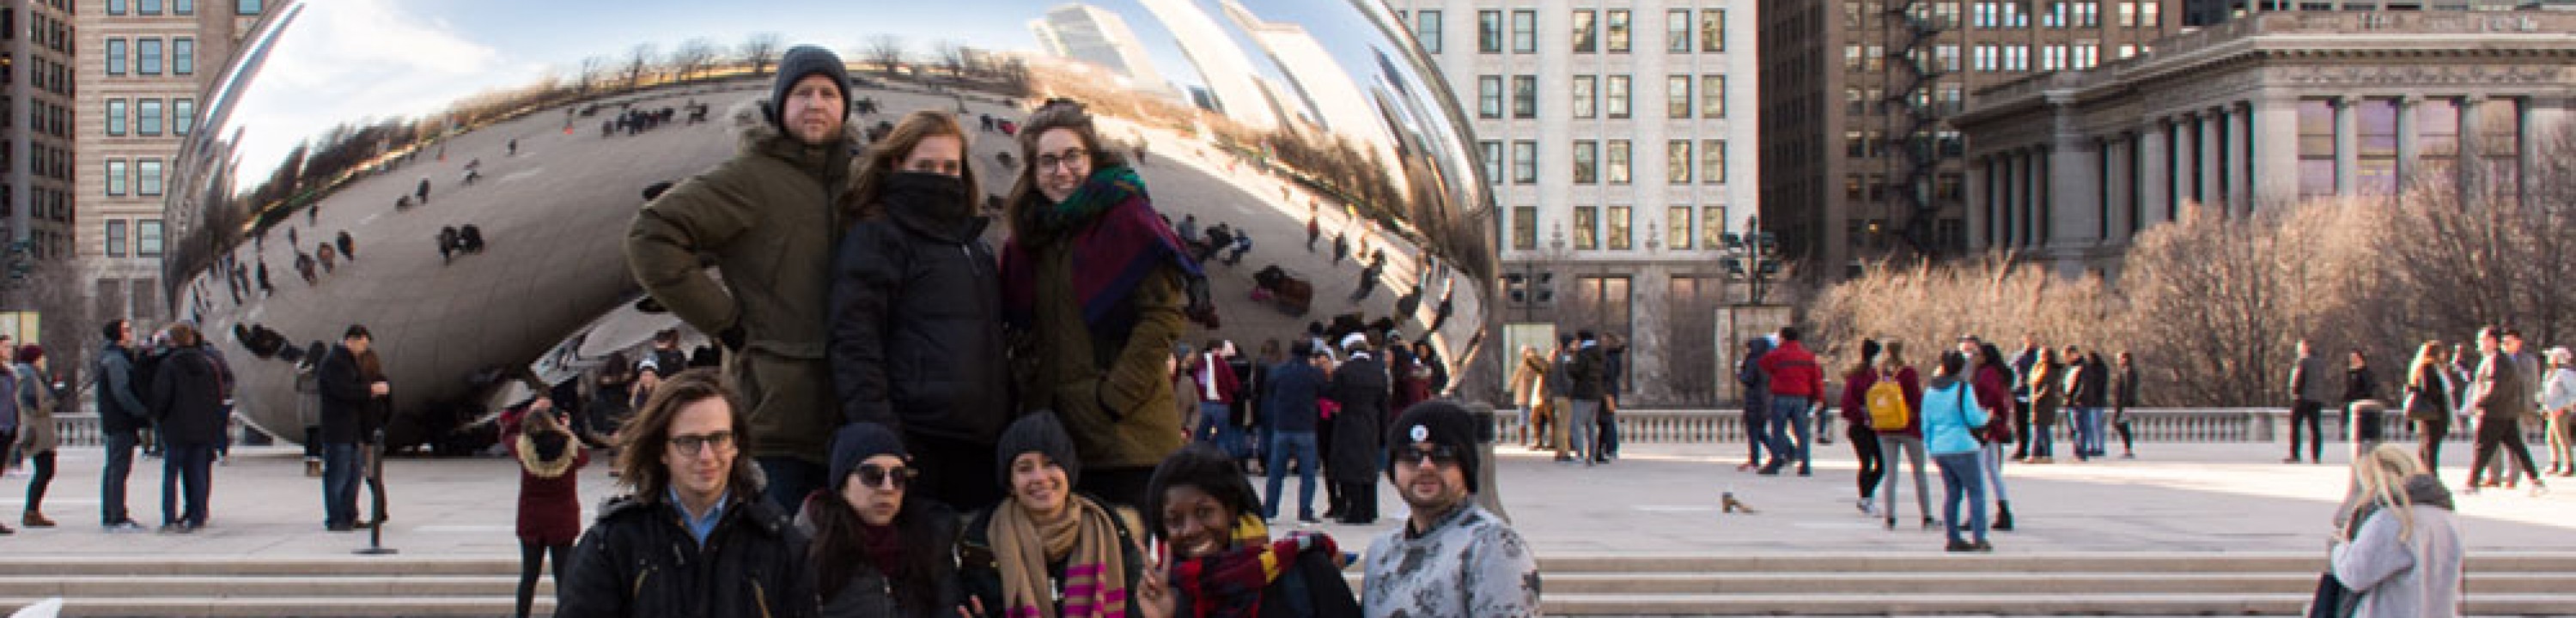 Students pose in front of the Bean in Chicago.